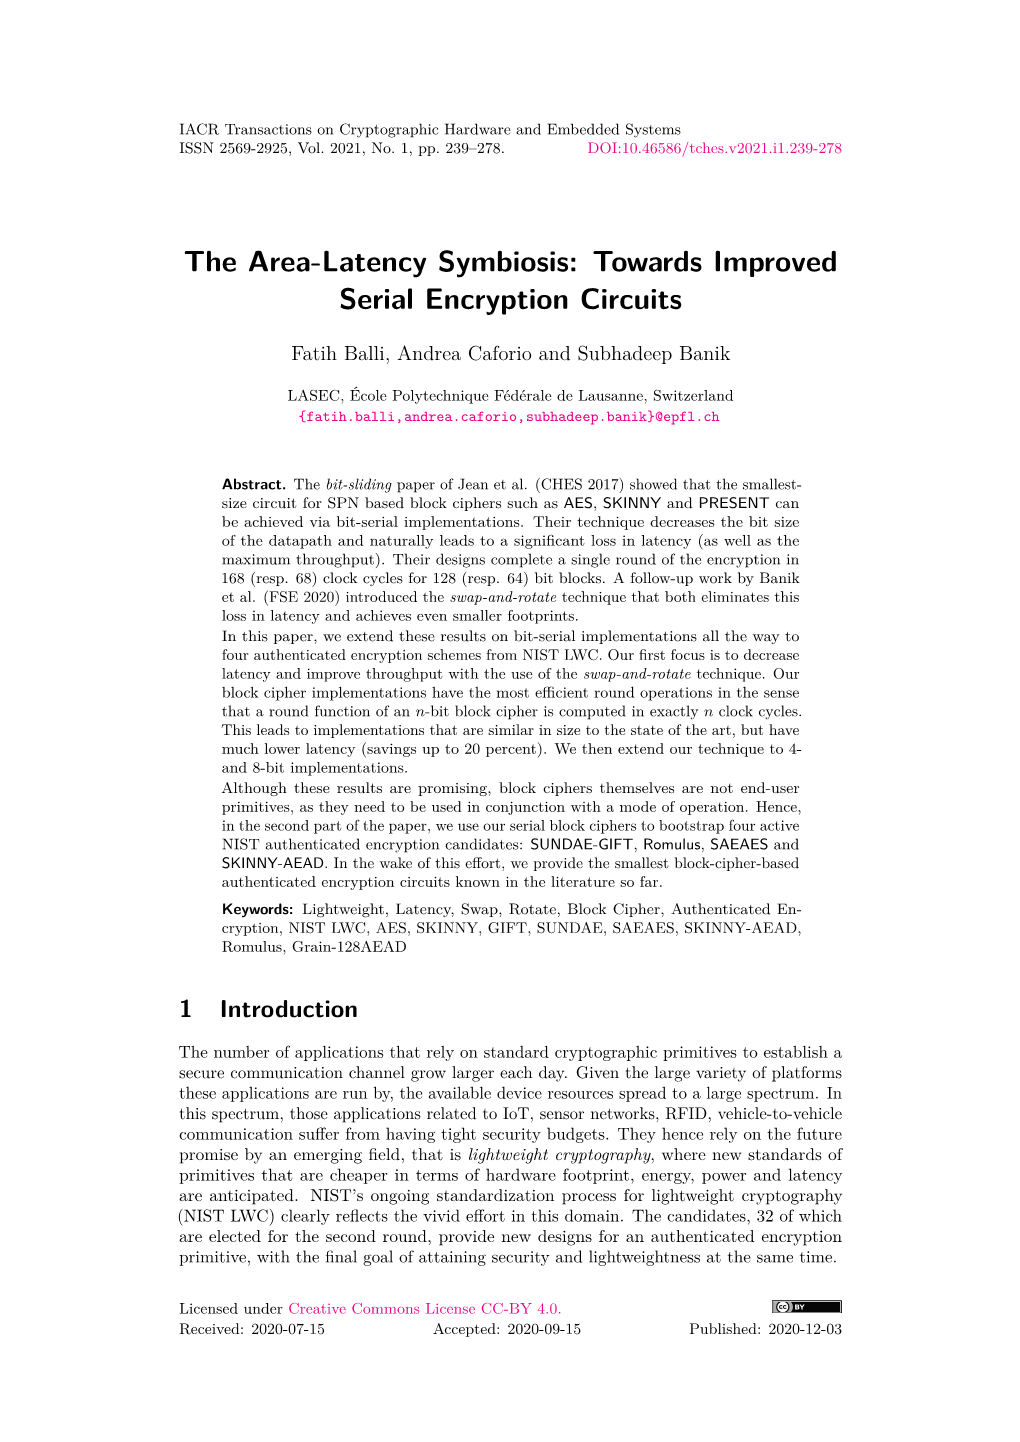 The Area-Latency Symbiosis: Towards Improved Serial Encryption Circuits